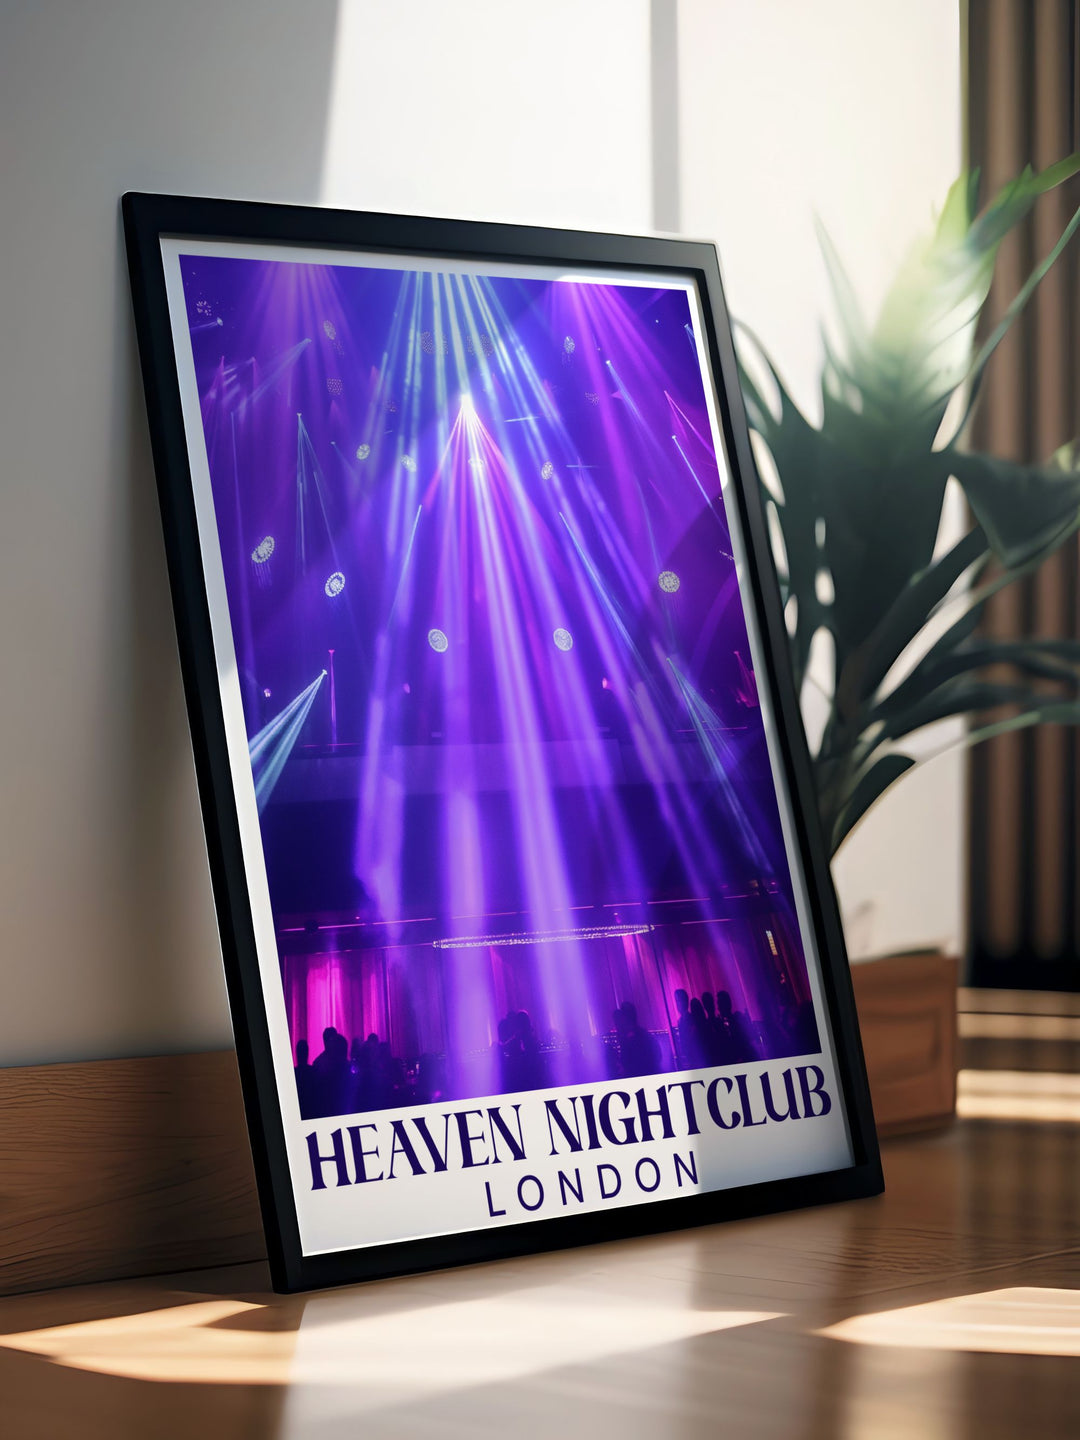 Featuring Heaven Nightclub, this art print highlights the dynamic atmosphere and cultural heritage of one of Londons most famous nightclubs.